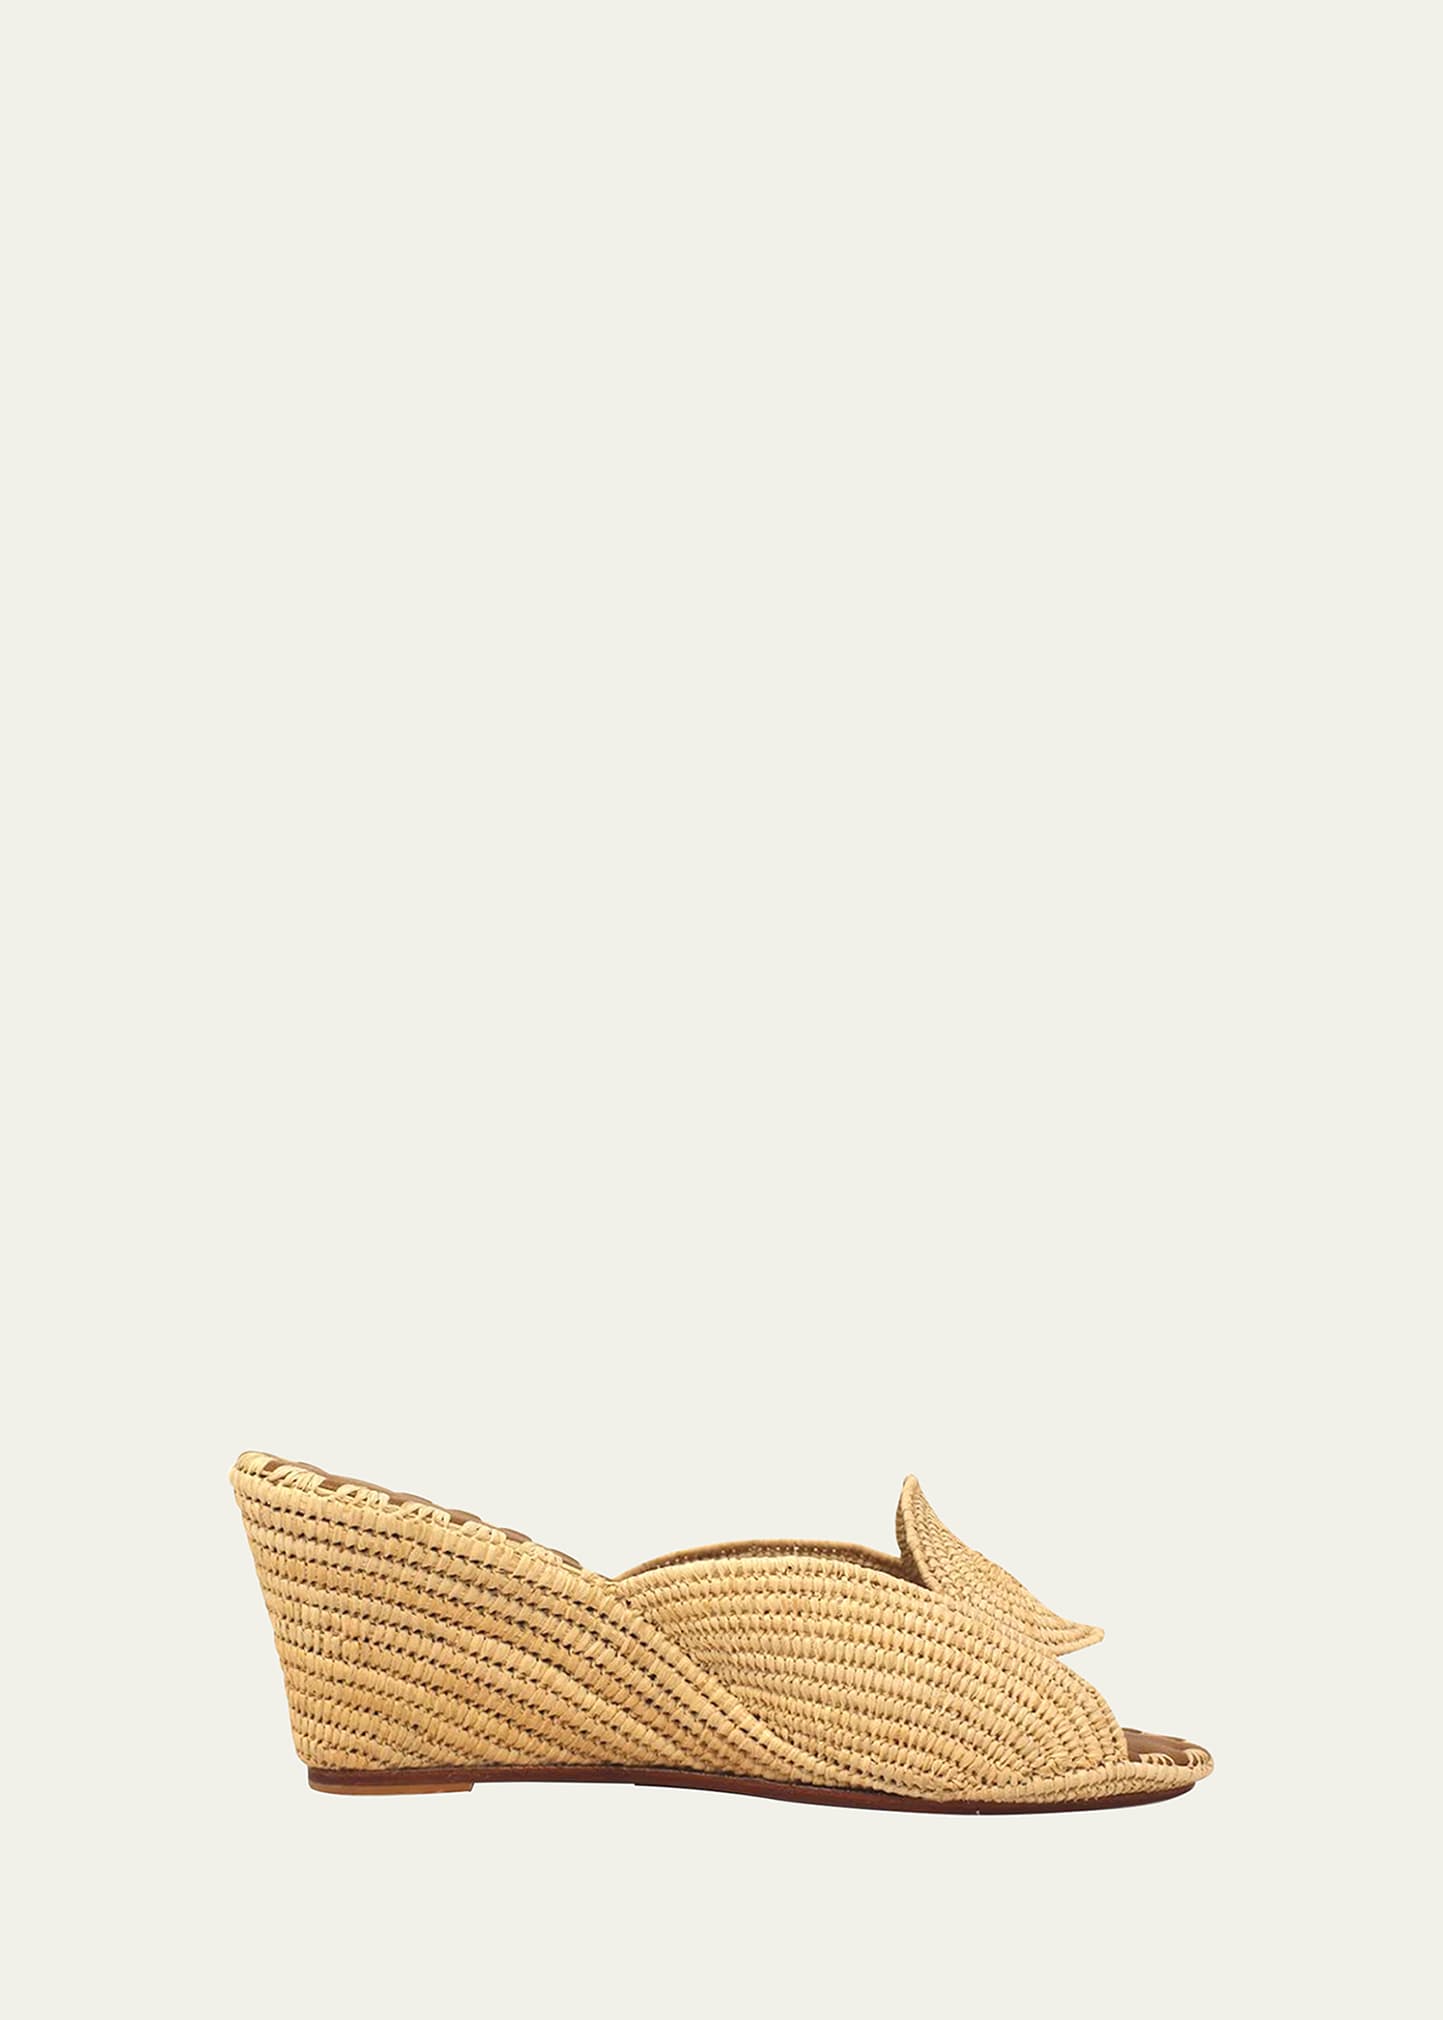 Carrie Forbes Etre Raffia Wedge Sandals